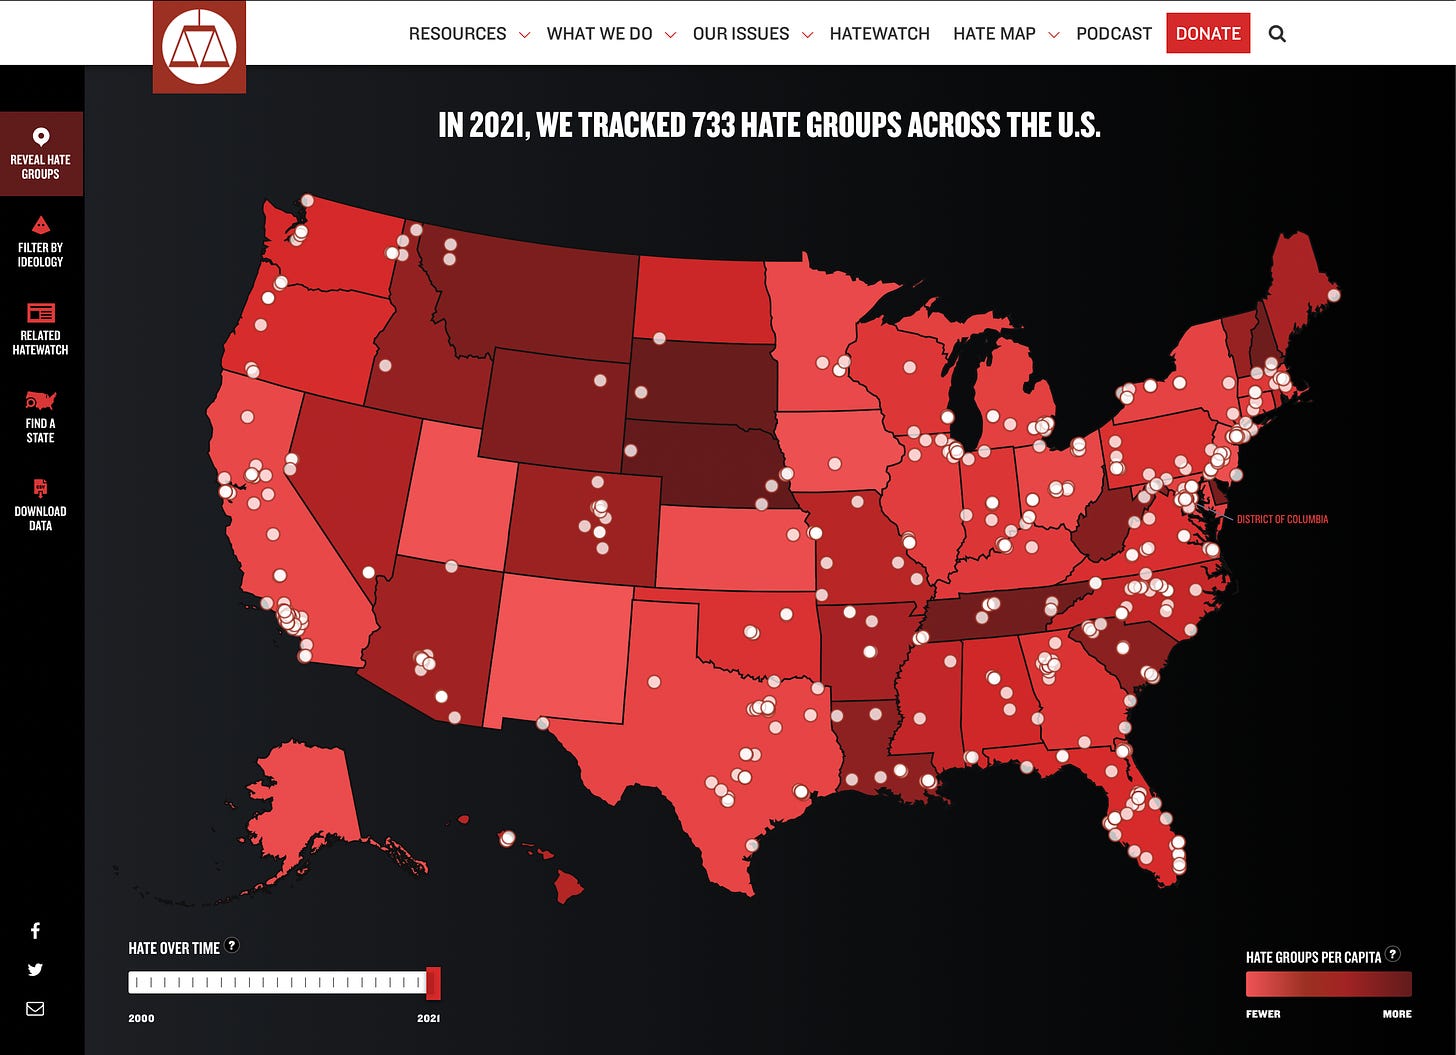 SPLC interactive hate map, which last year tracked 733 hate groups across the U.S.